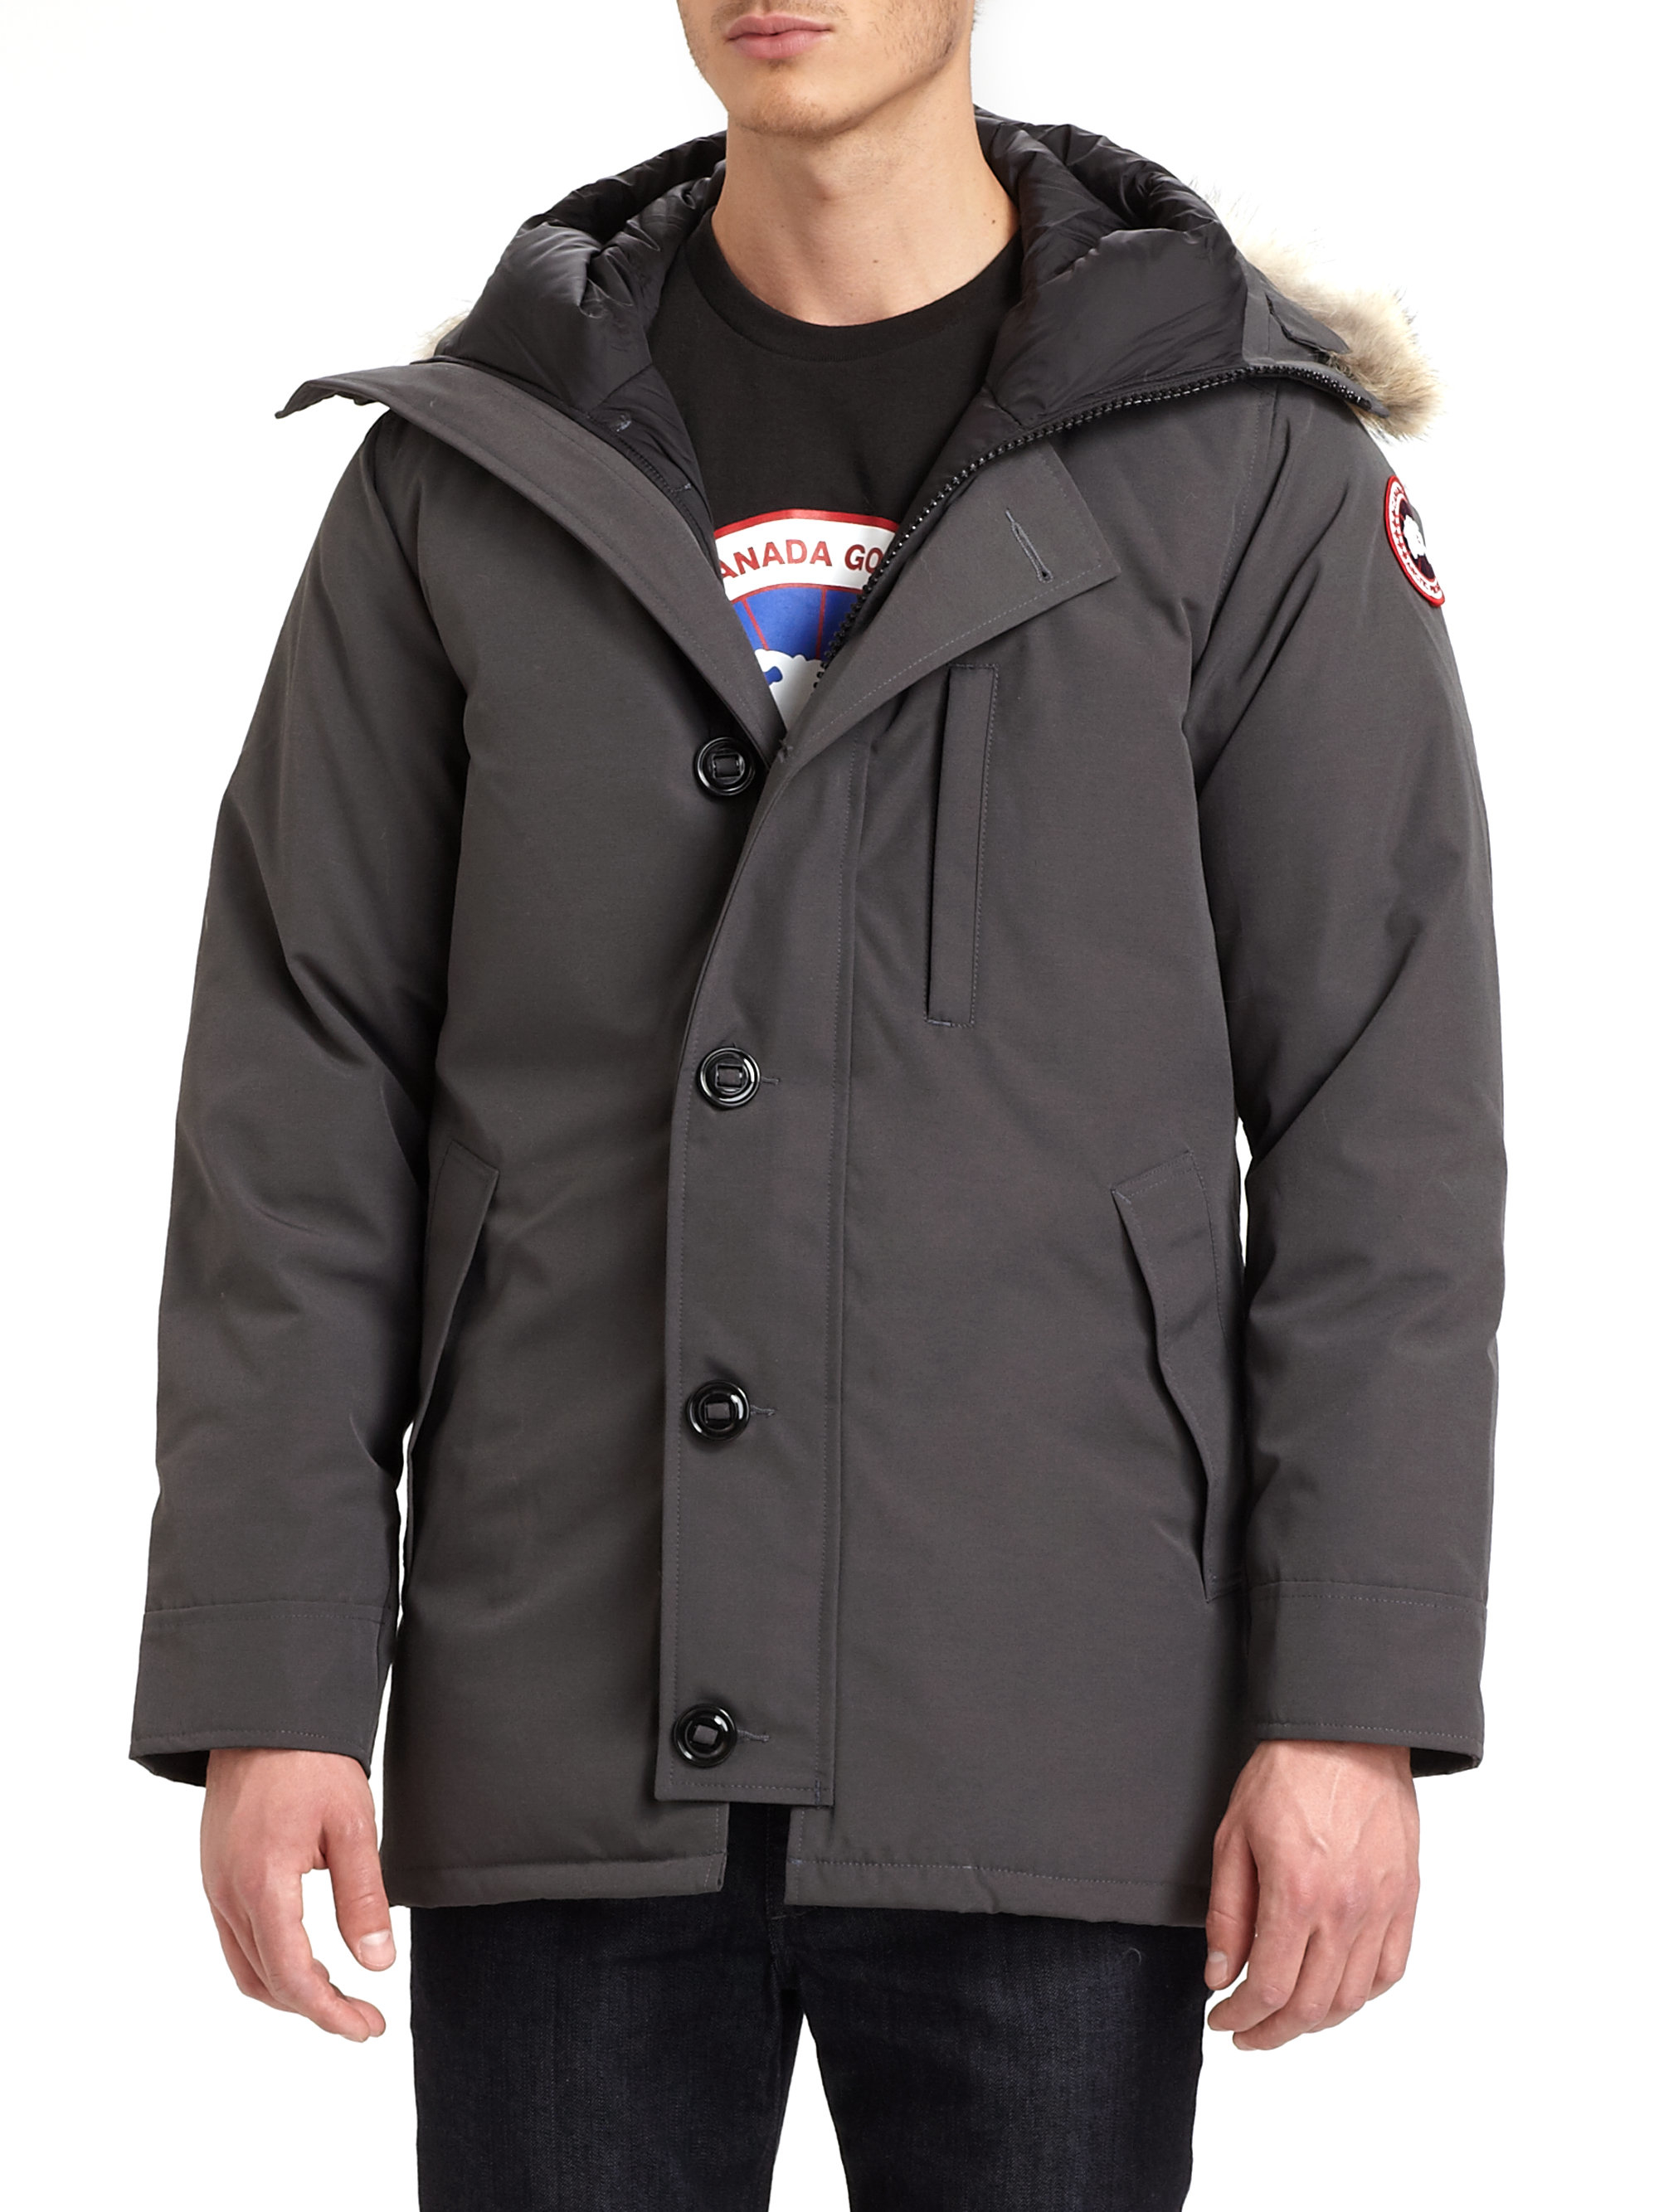 Canada Goose Chateau Parka In Gray For Men Lyst